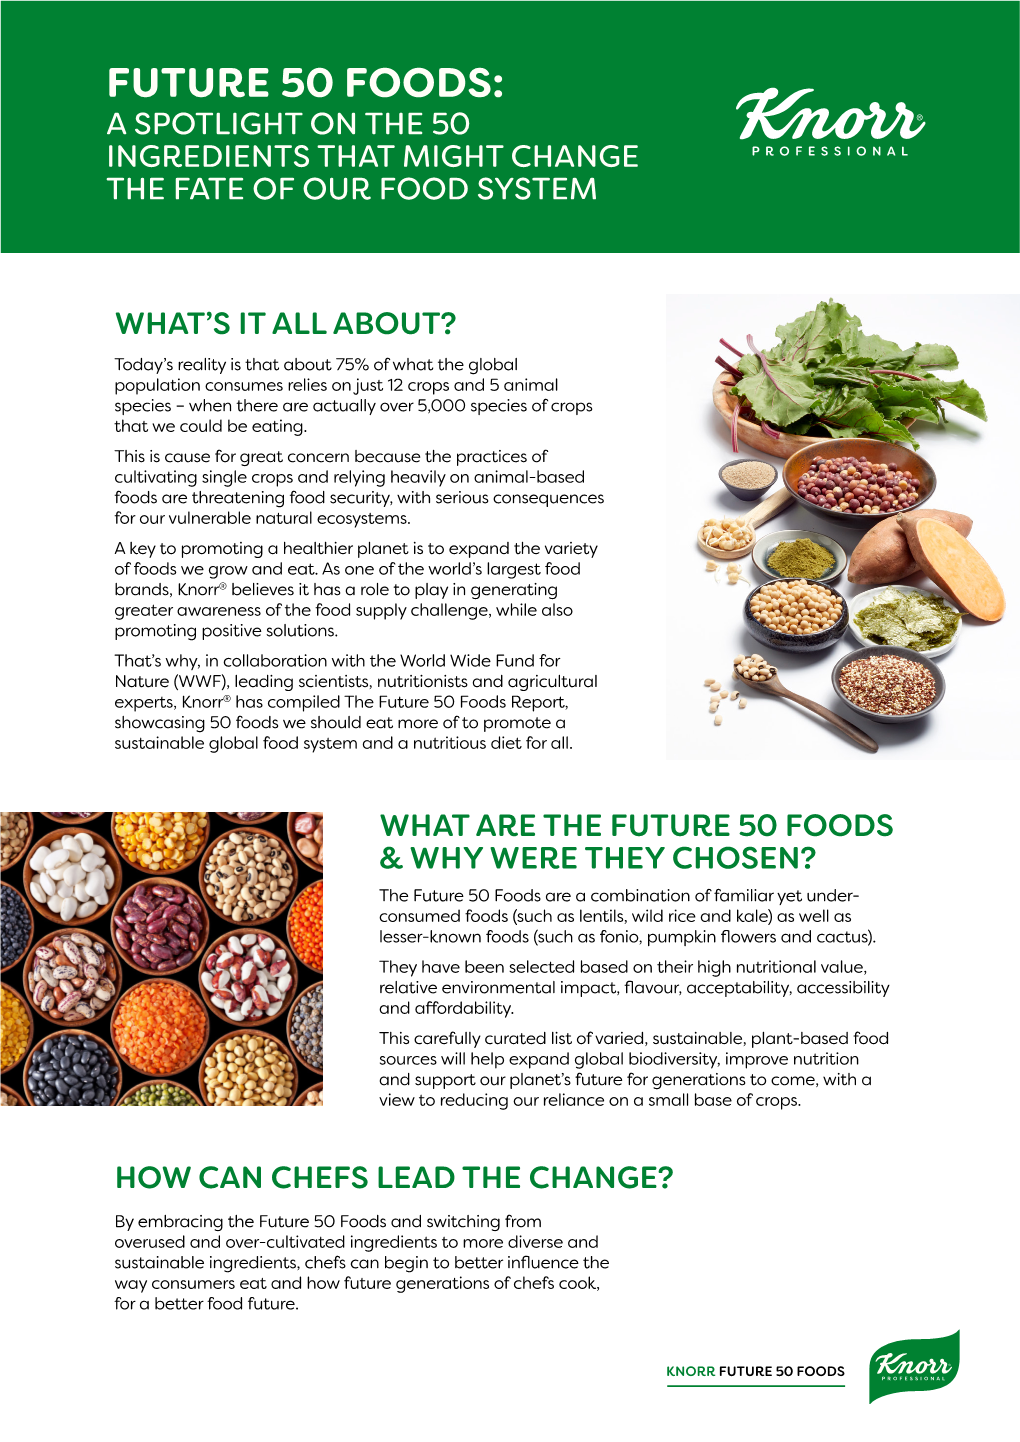 Future 50 Foods: a Spotlight on the 50 Ingredients That Might Change the Fate of Our Food System